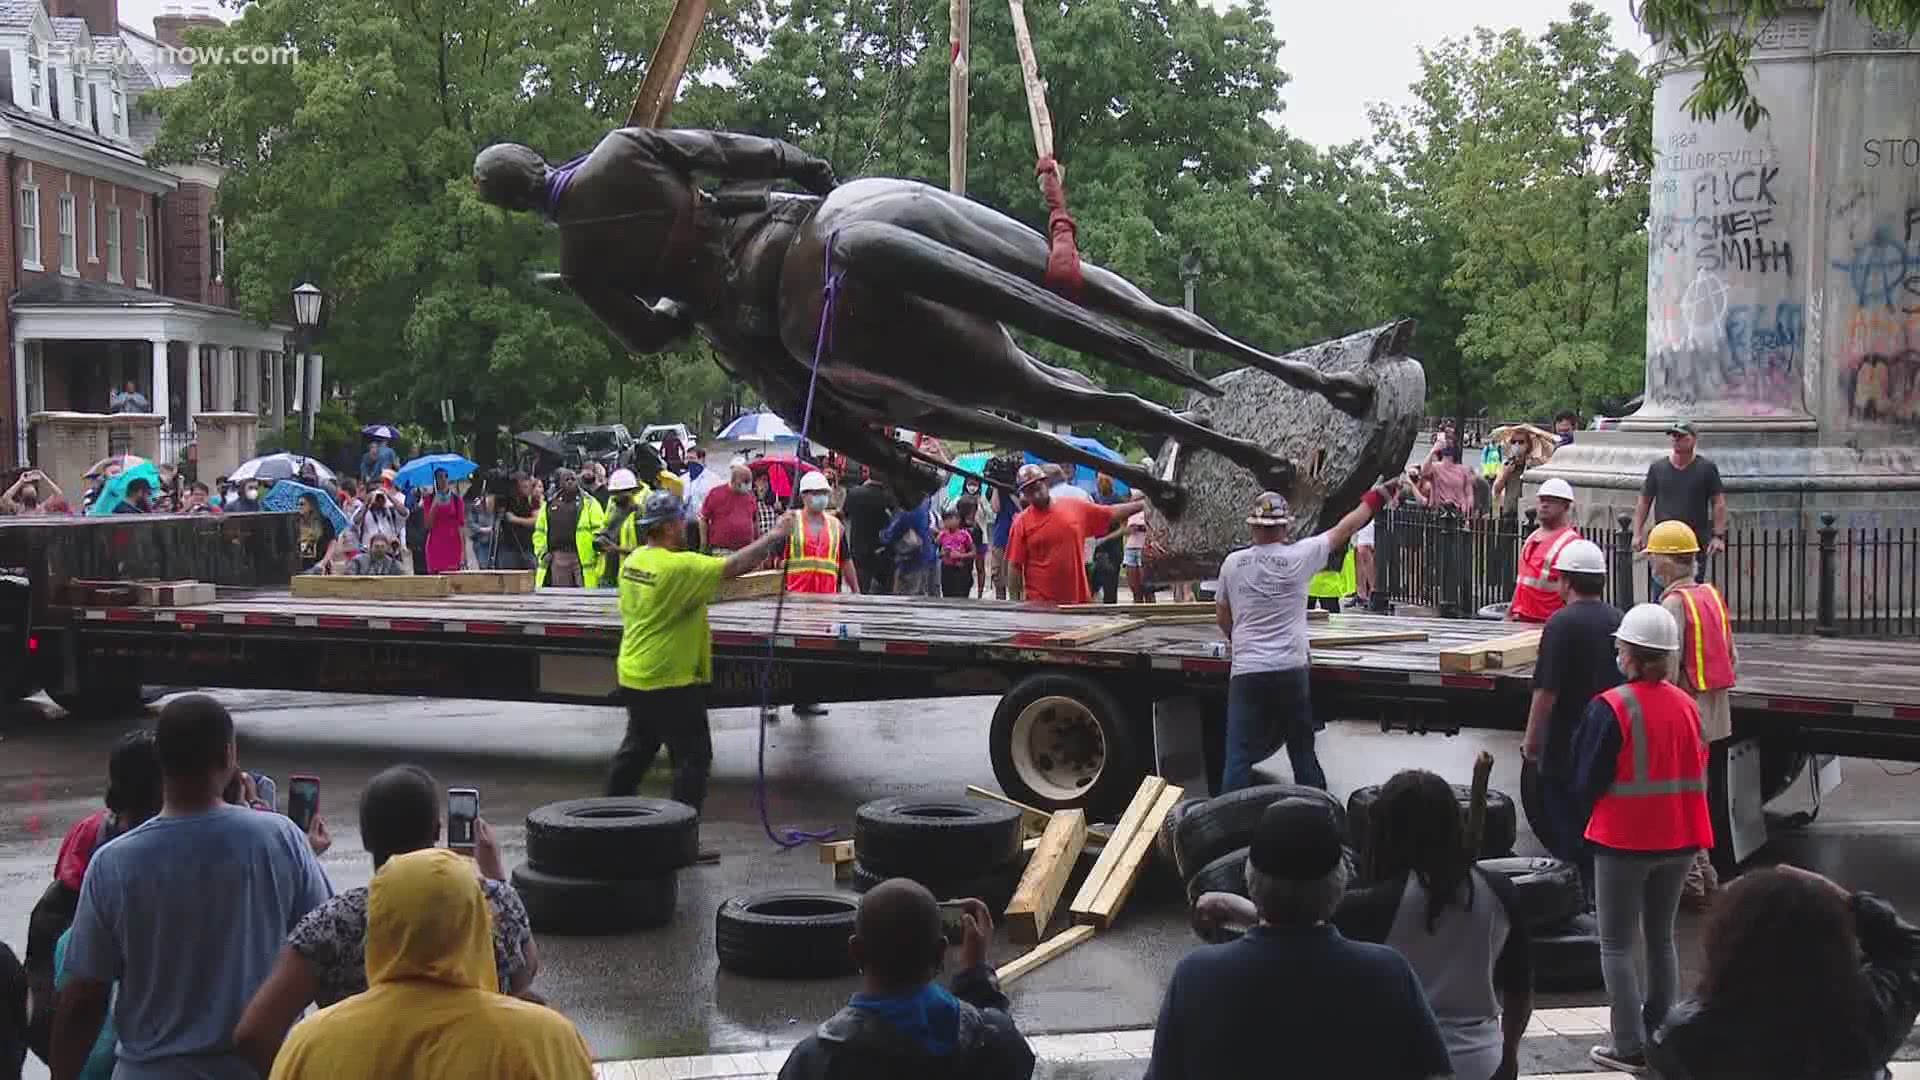 Mayor Levar Stoney used his emergency powers to order crews in Richmond to begin taking down the monuments in the former capital of the Confederacy.